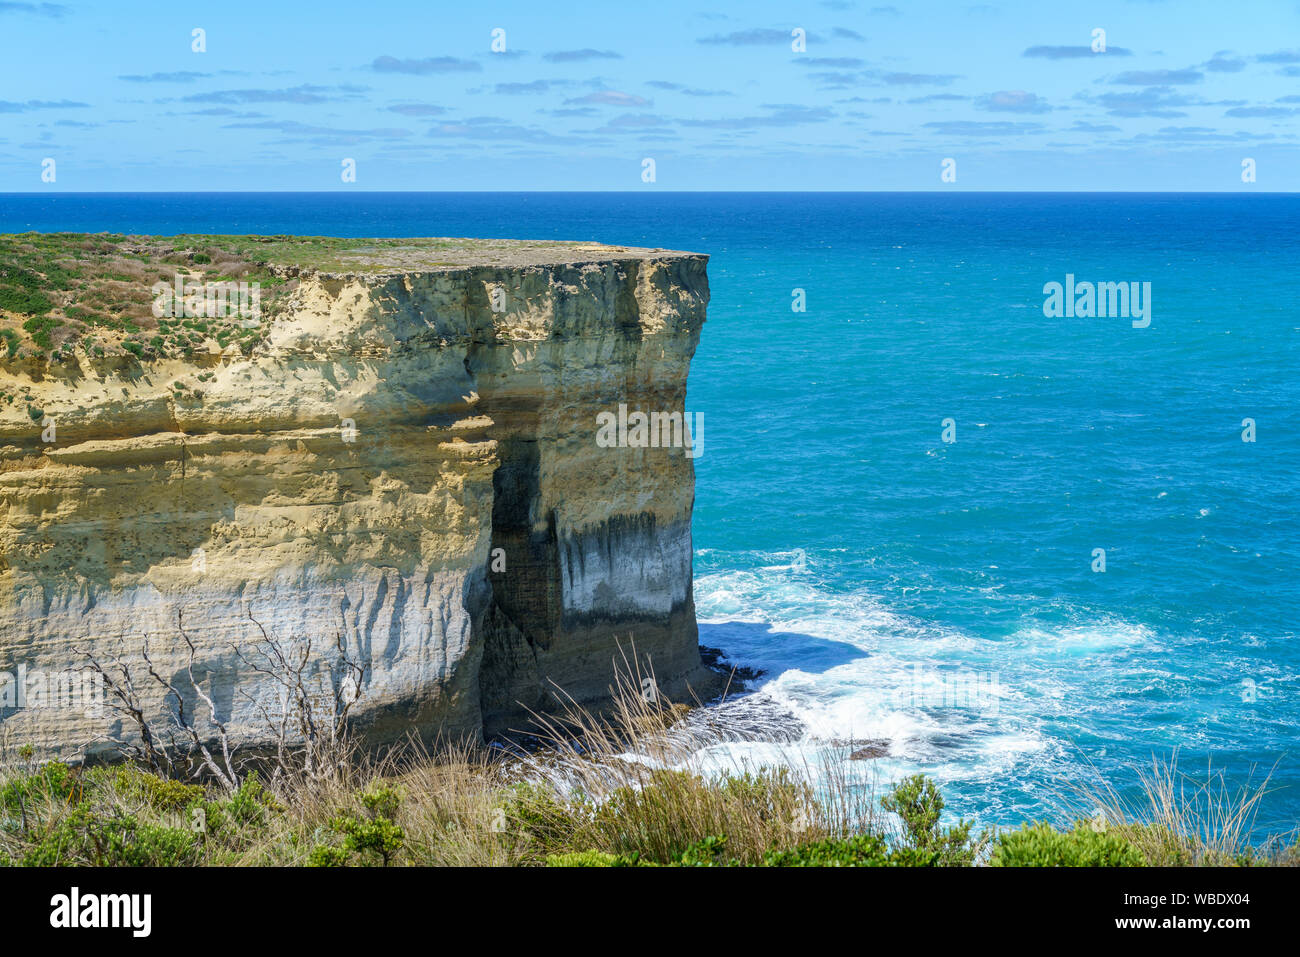 Island Arch lookout, parco nazionale di Port Campbell, Great Ocean Road, australia Foto Stock